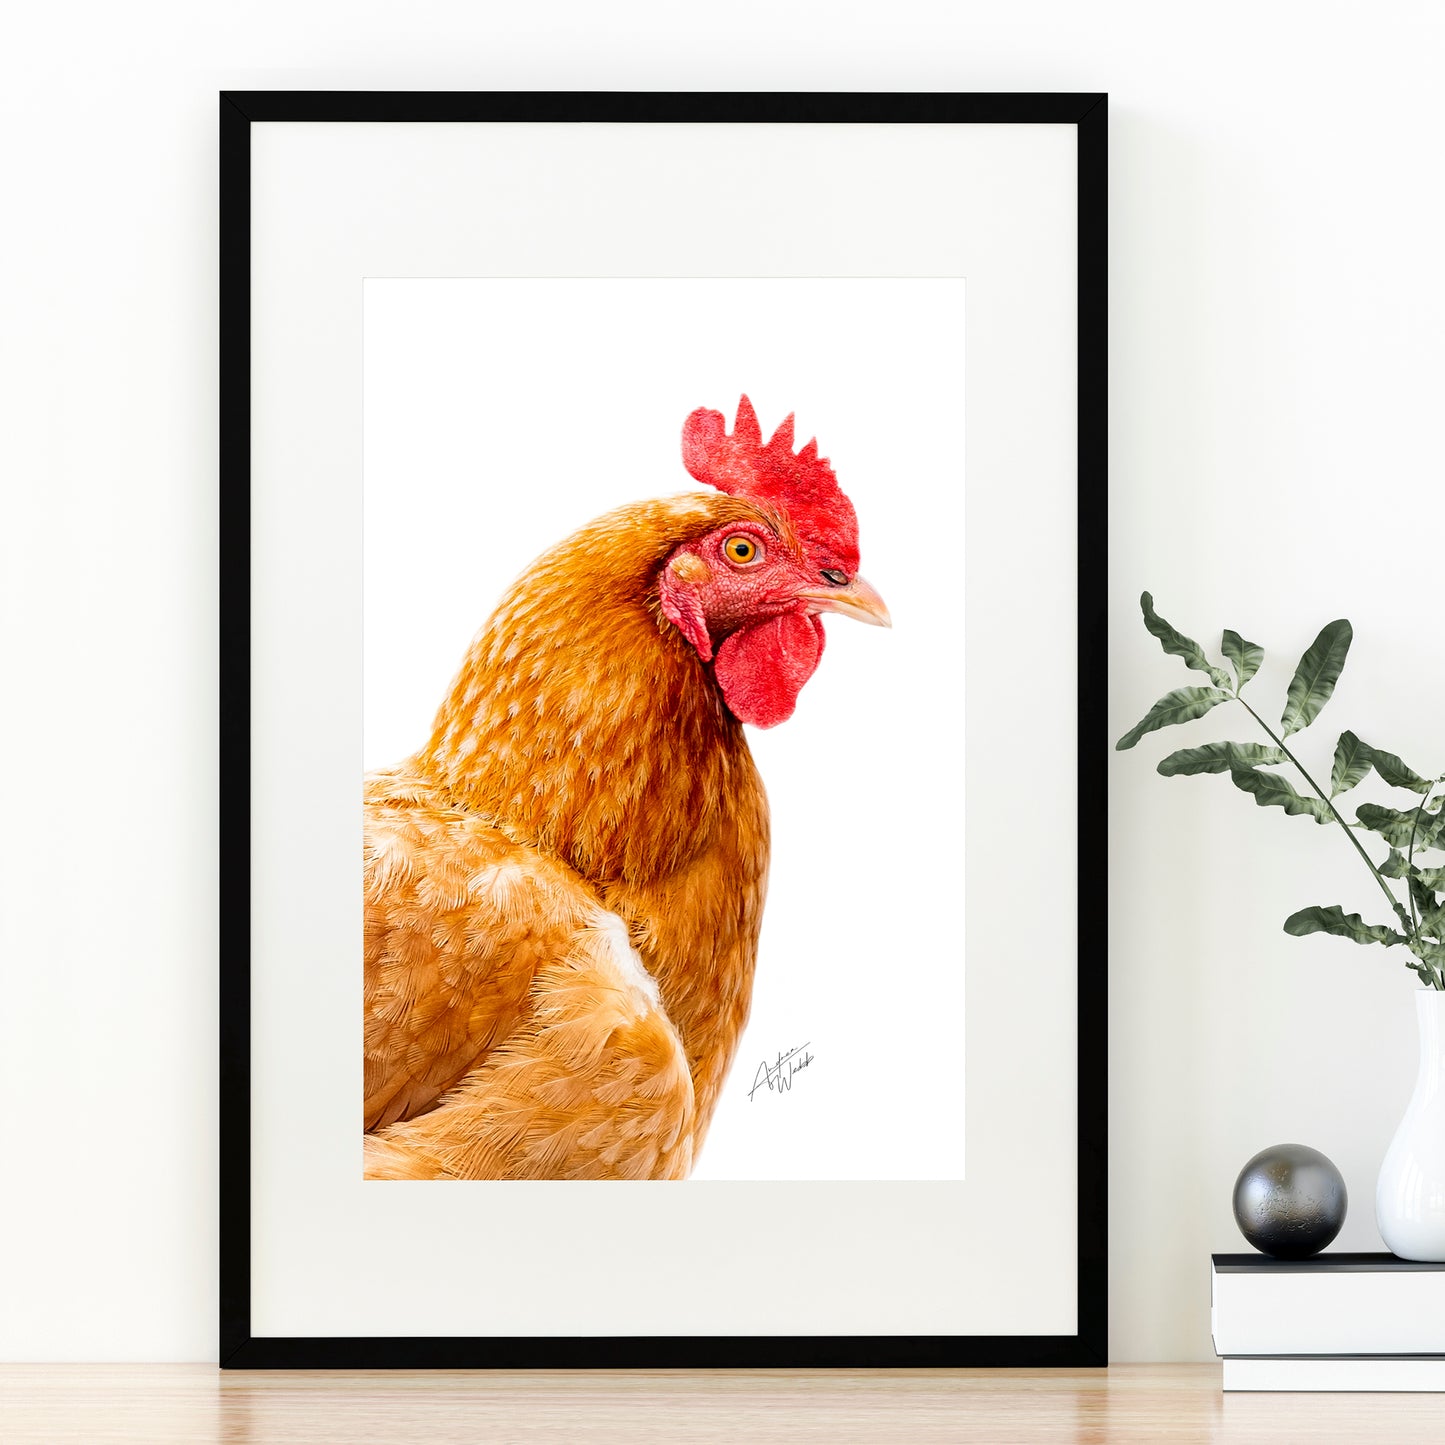 Isa Brown Hen Portrait on White Background - A stunning image capturing the natural beauty of an Isa Brown hen with its distinctive coloring. Perfect for poultry enthusiasts, this high-quality portrait on a white background is a visually appealing addition to any space. Elevate your decor with the grace and charm of this Isa Brown hen image. Chicken art, chicken gifts, chicken decor, chicken canvases, chicken fine art